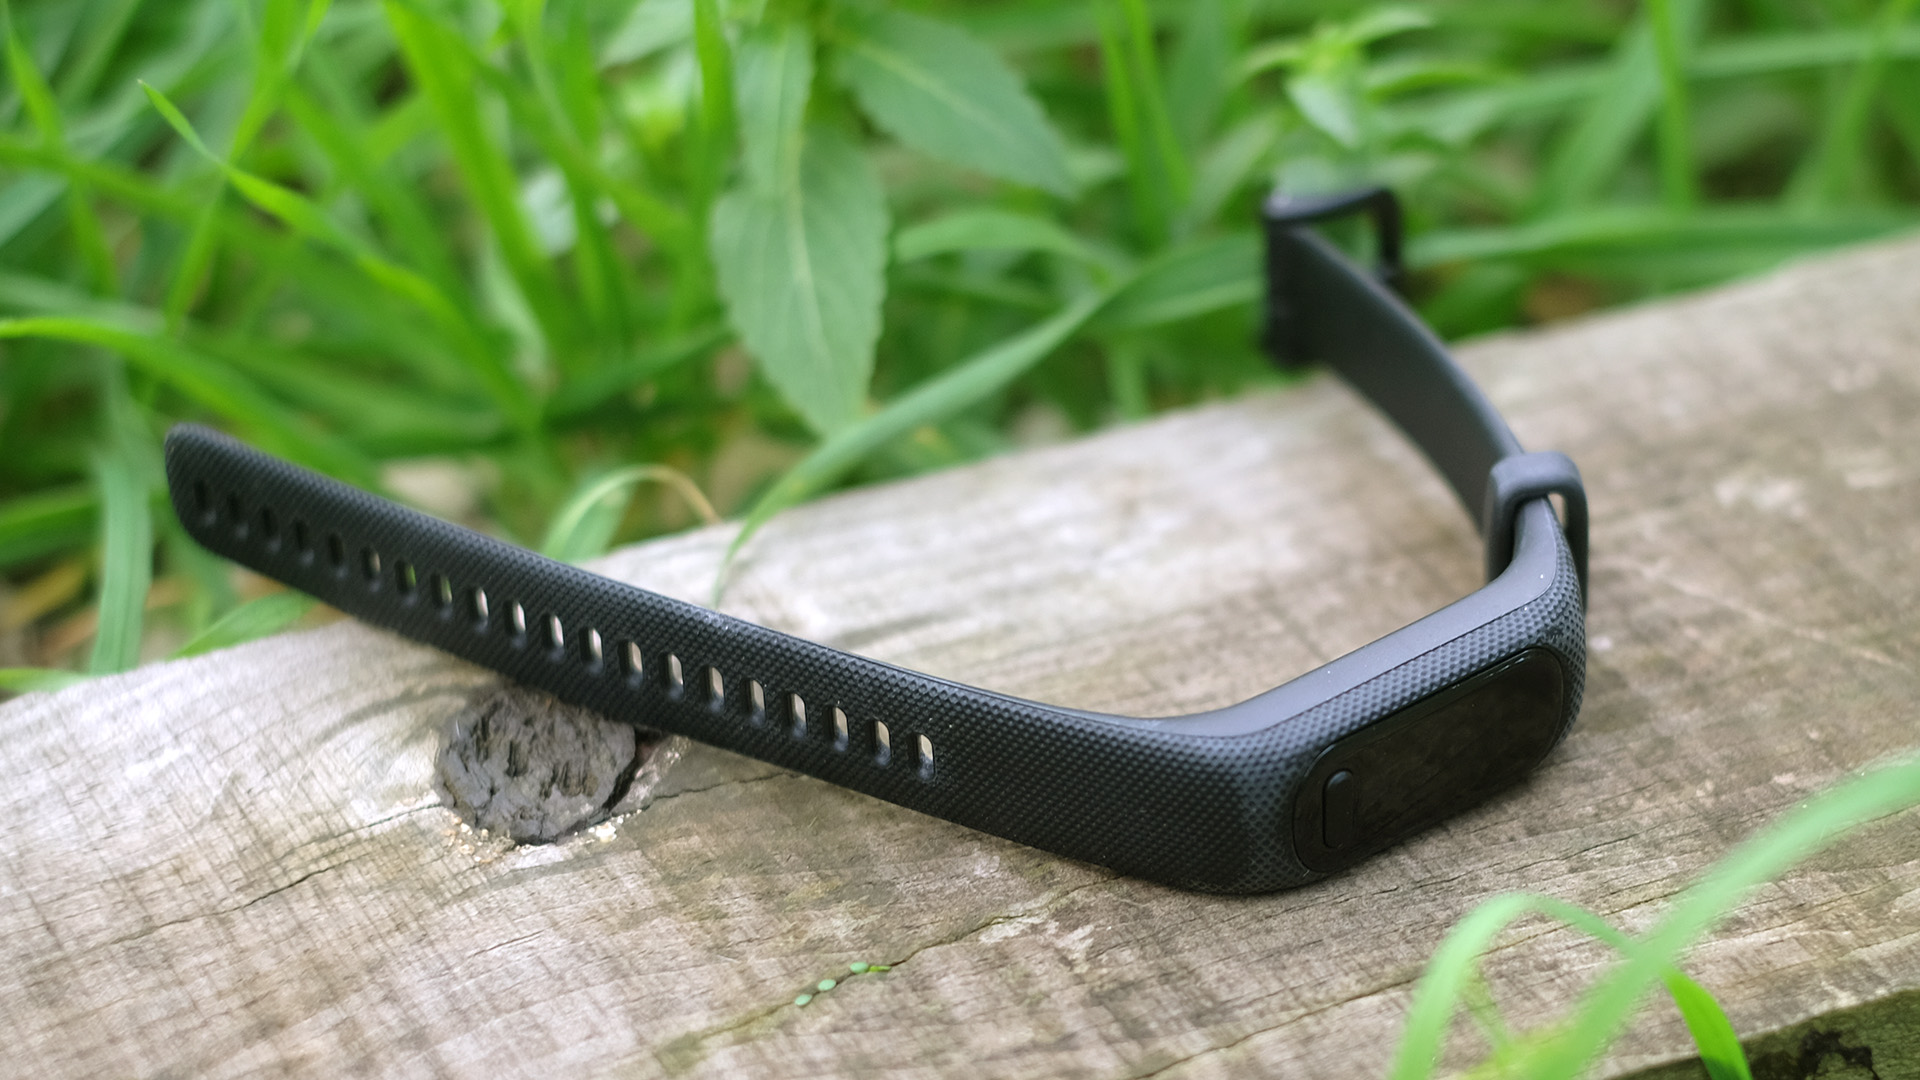 Garmin Vivosmart 5 being tested by Live Science contributor Andrew Williams